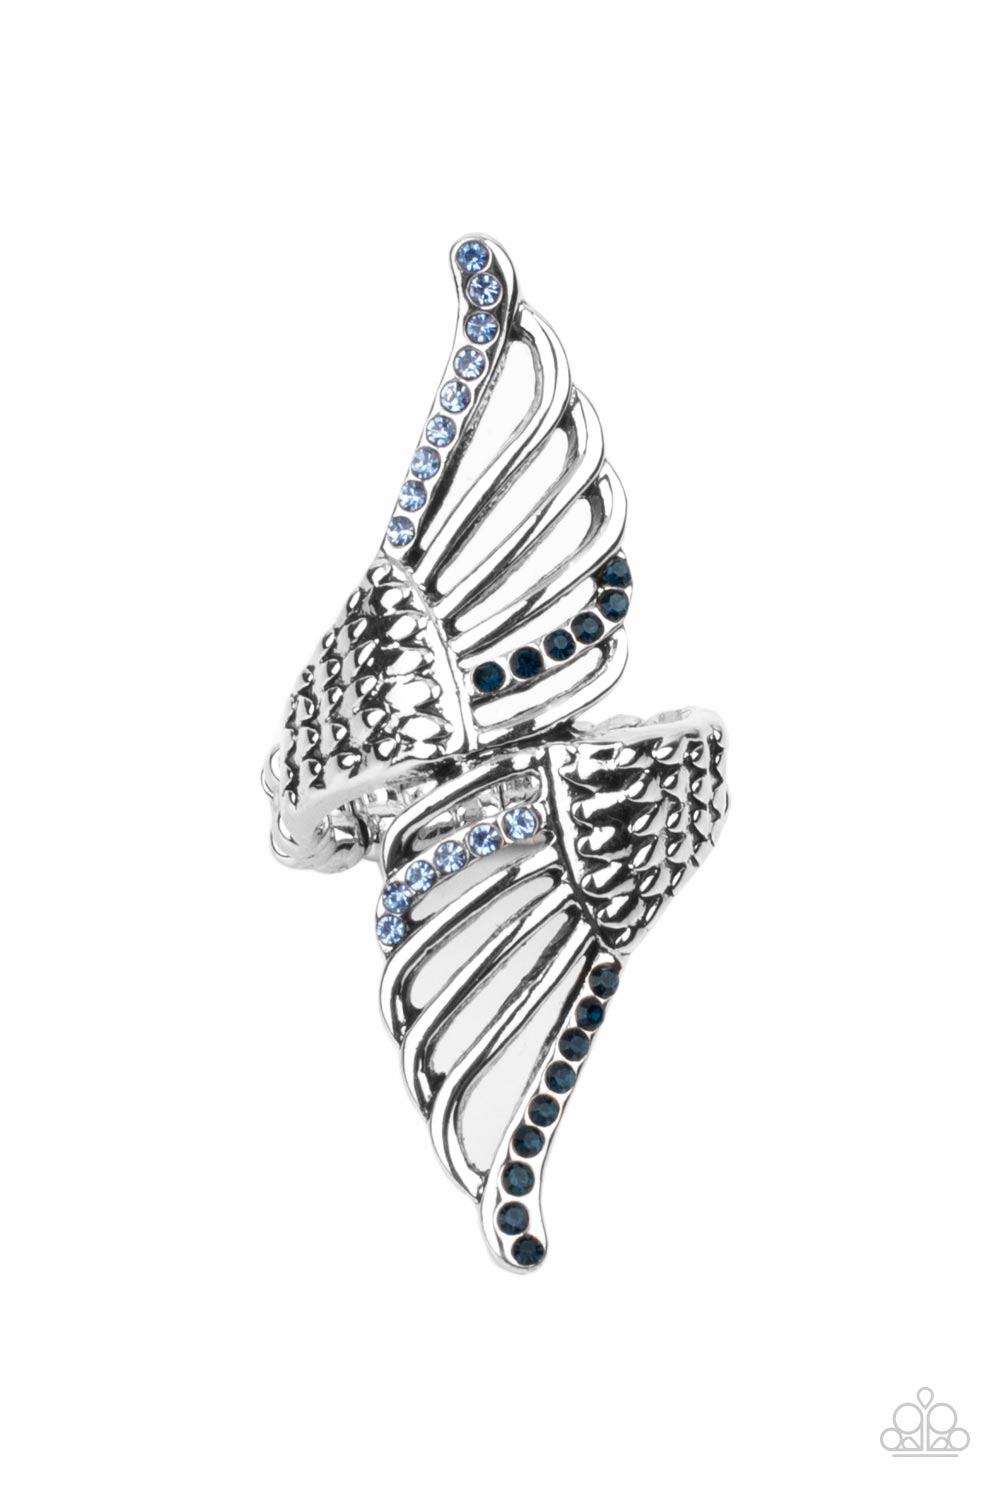 Angels Among Us Blue Ring - Paparazzi Accessories  Featuring lifelike feathery detail, two airy silver wings delicately wrap around the finger. Rows of dainty blue rhinestones adorn the winged accents, adding a celestial shimmer to the angelic centerpiece. Features a stretchy band for a flexible fit.  Sold as one individual ring.